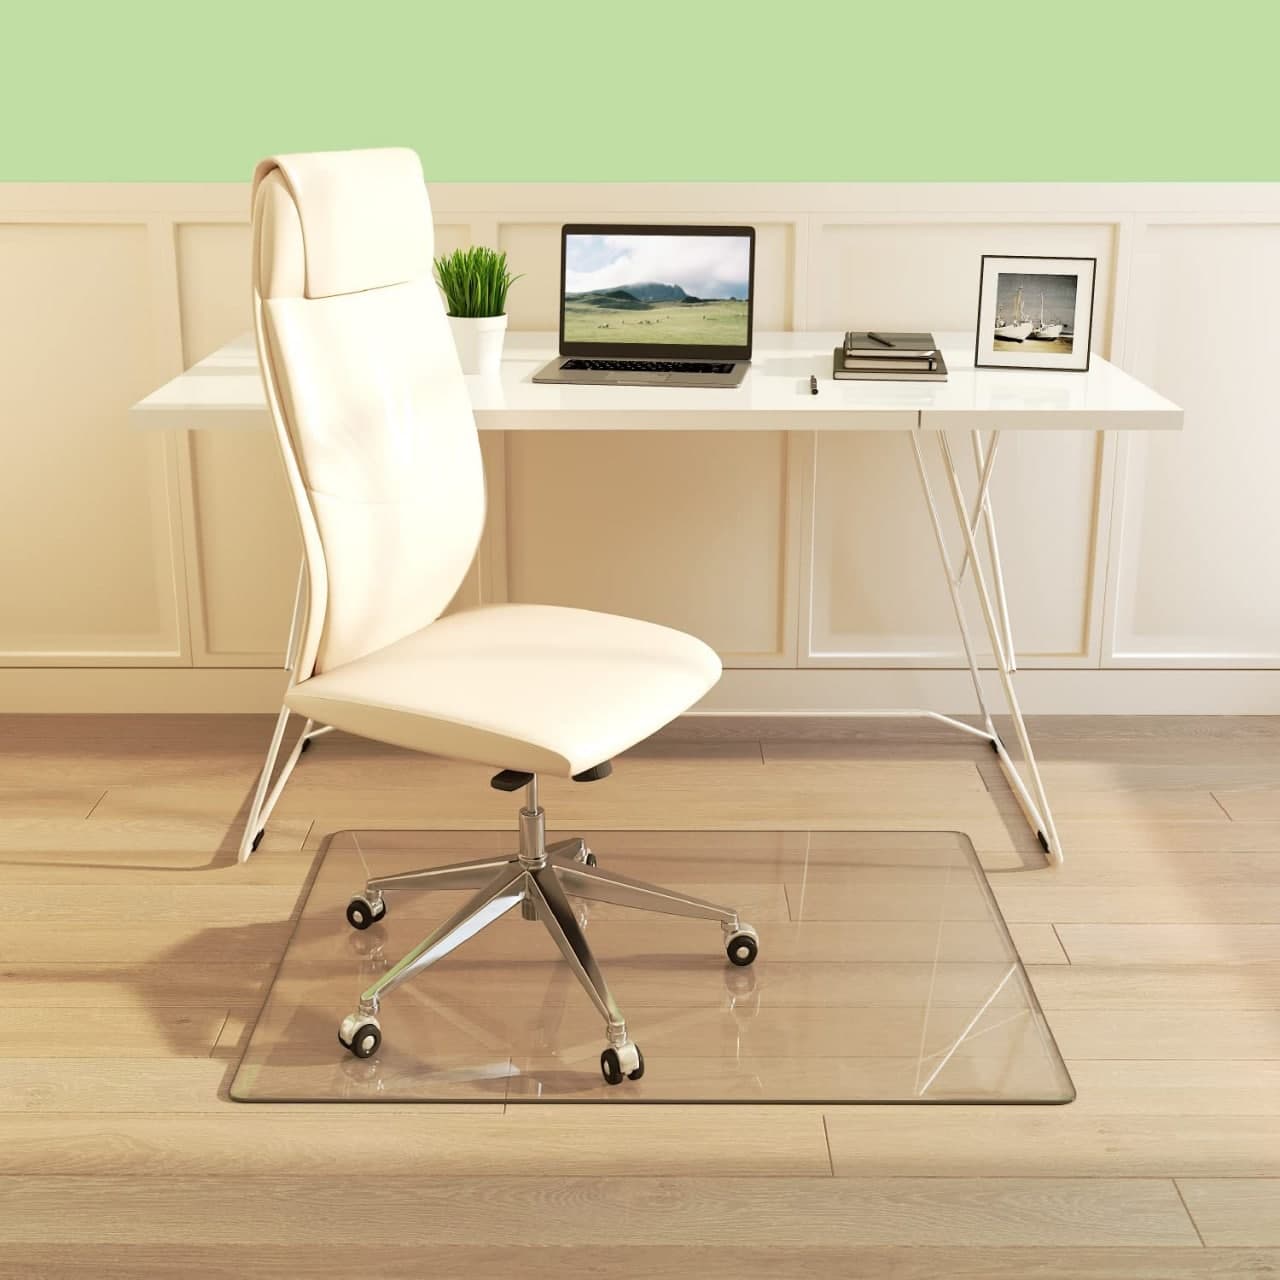 Tempered Glass Office Chair Mat - 36"x48" - for Carpet and Hardwood Floors | Stefania Sole